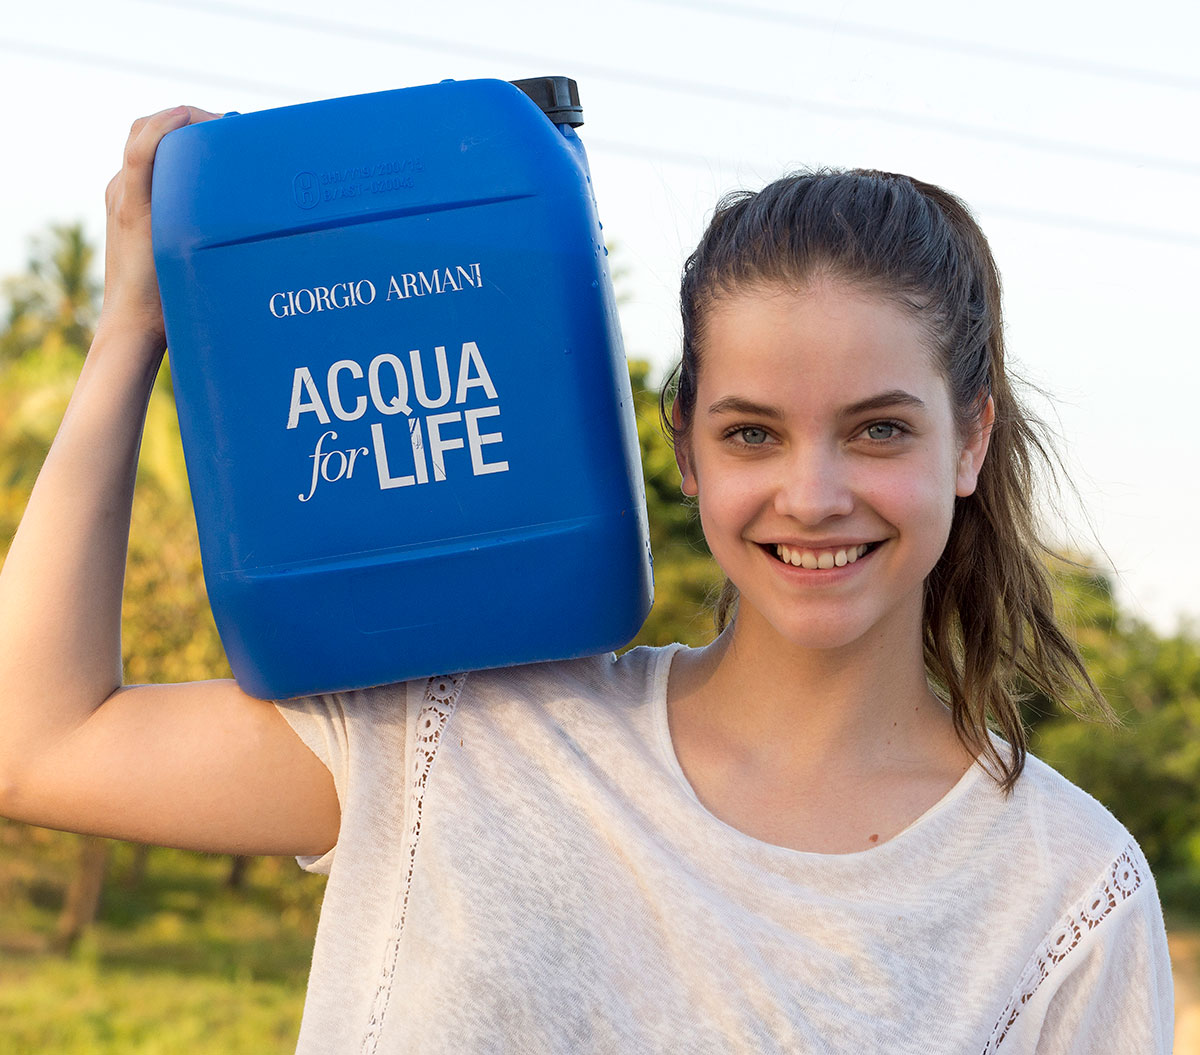 Acqua for Life - Your voice is powerful